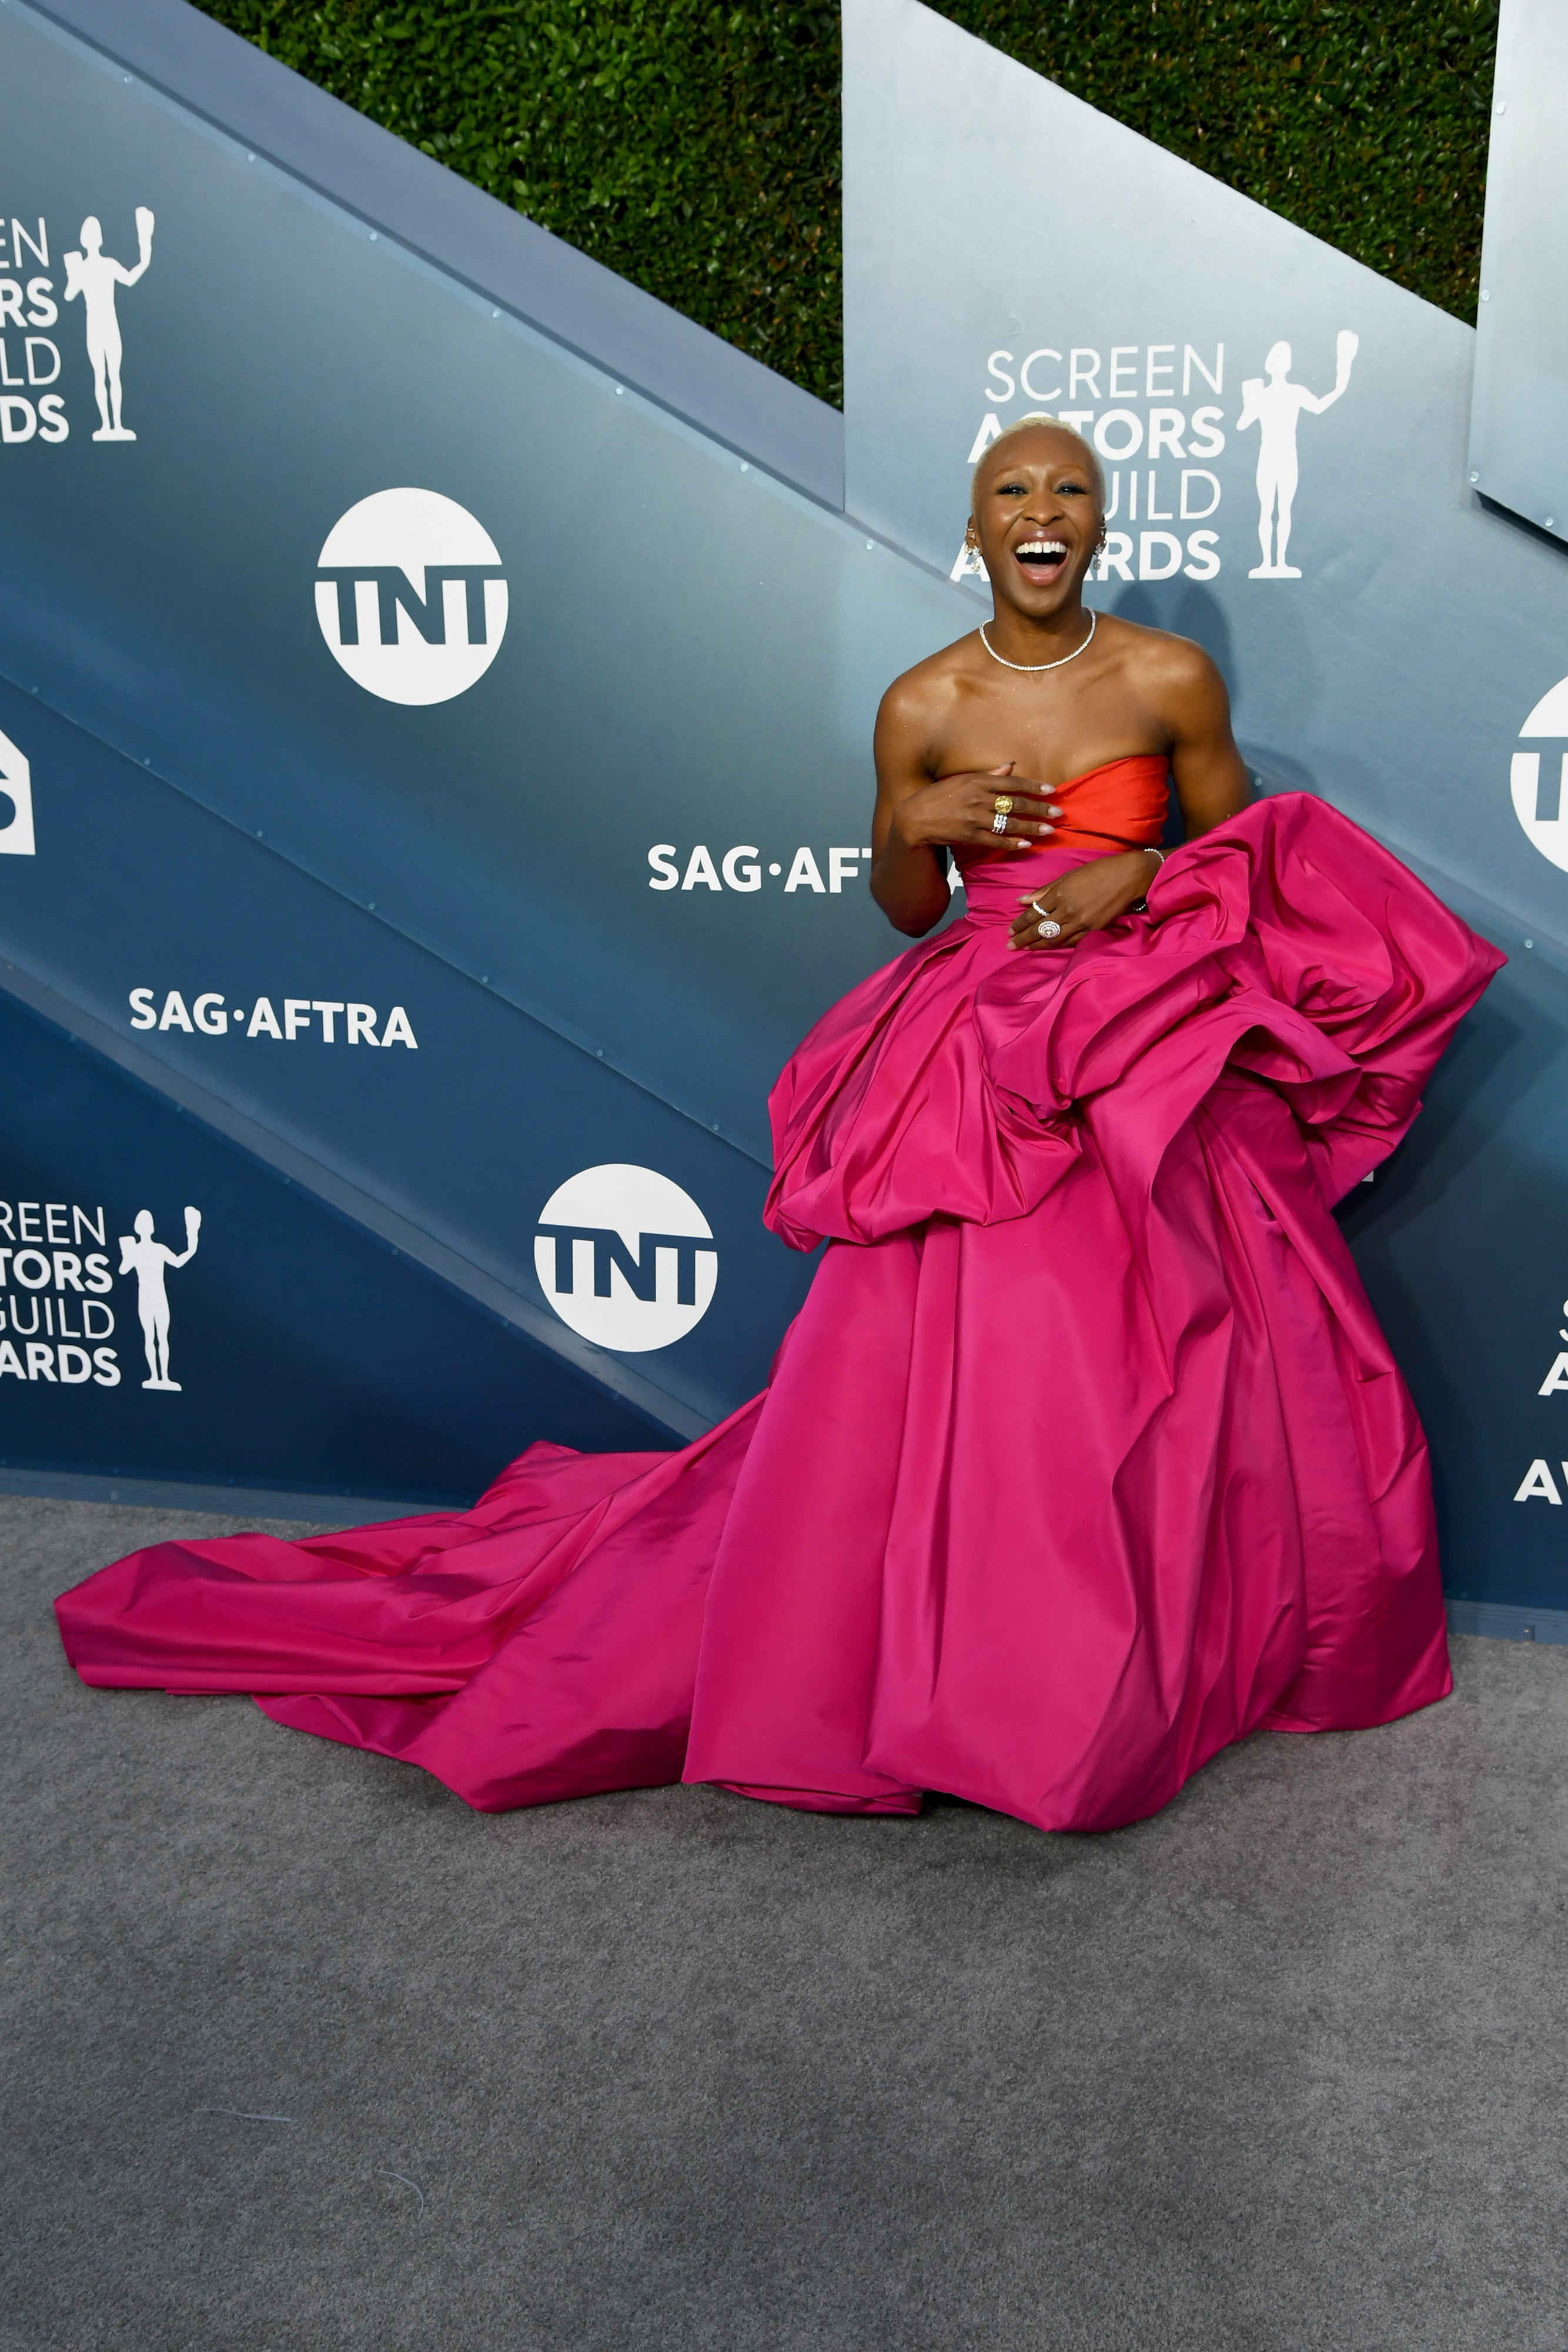 Cynthia Erivo Is Pretty In Pink At The SAG Awards